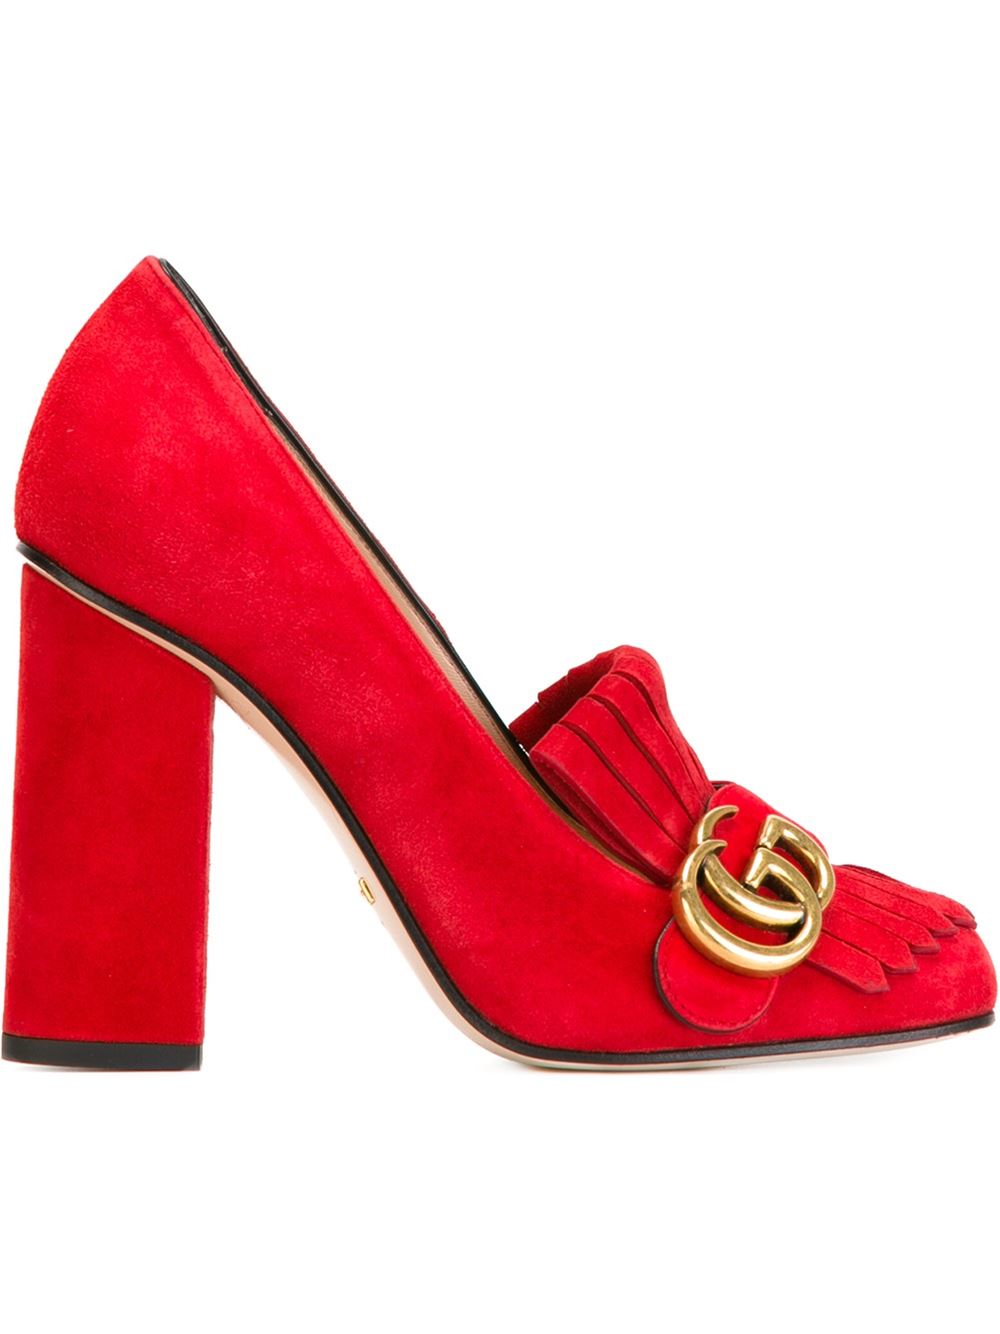 Lyst Gucci Shoes With Fringes Details And Double G in Red